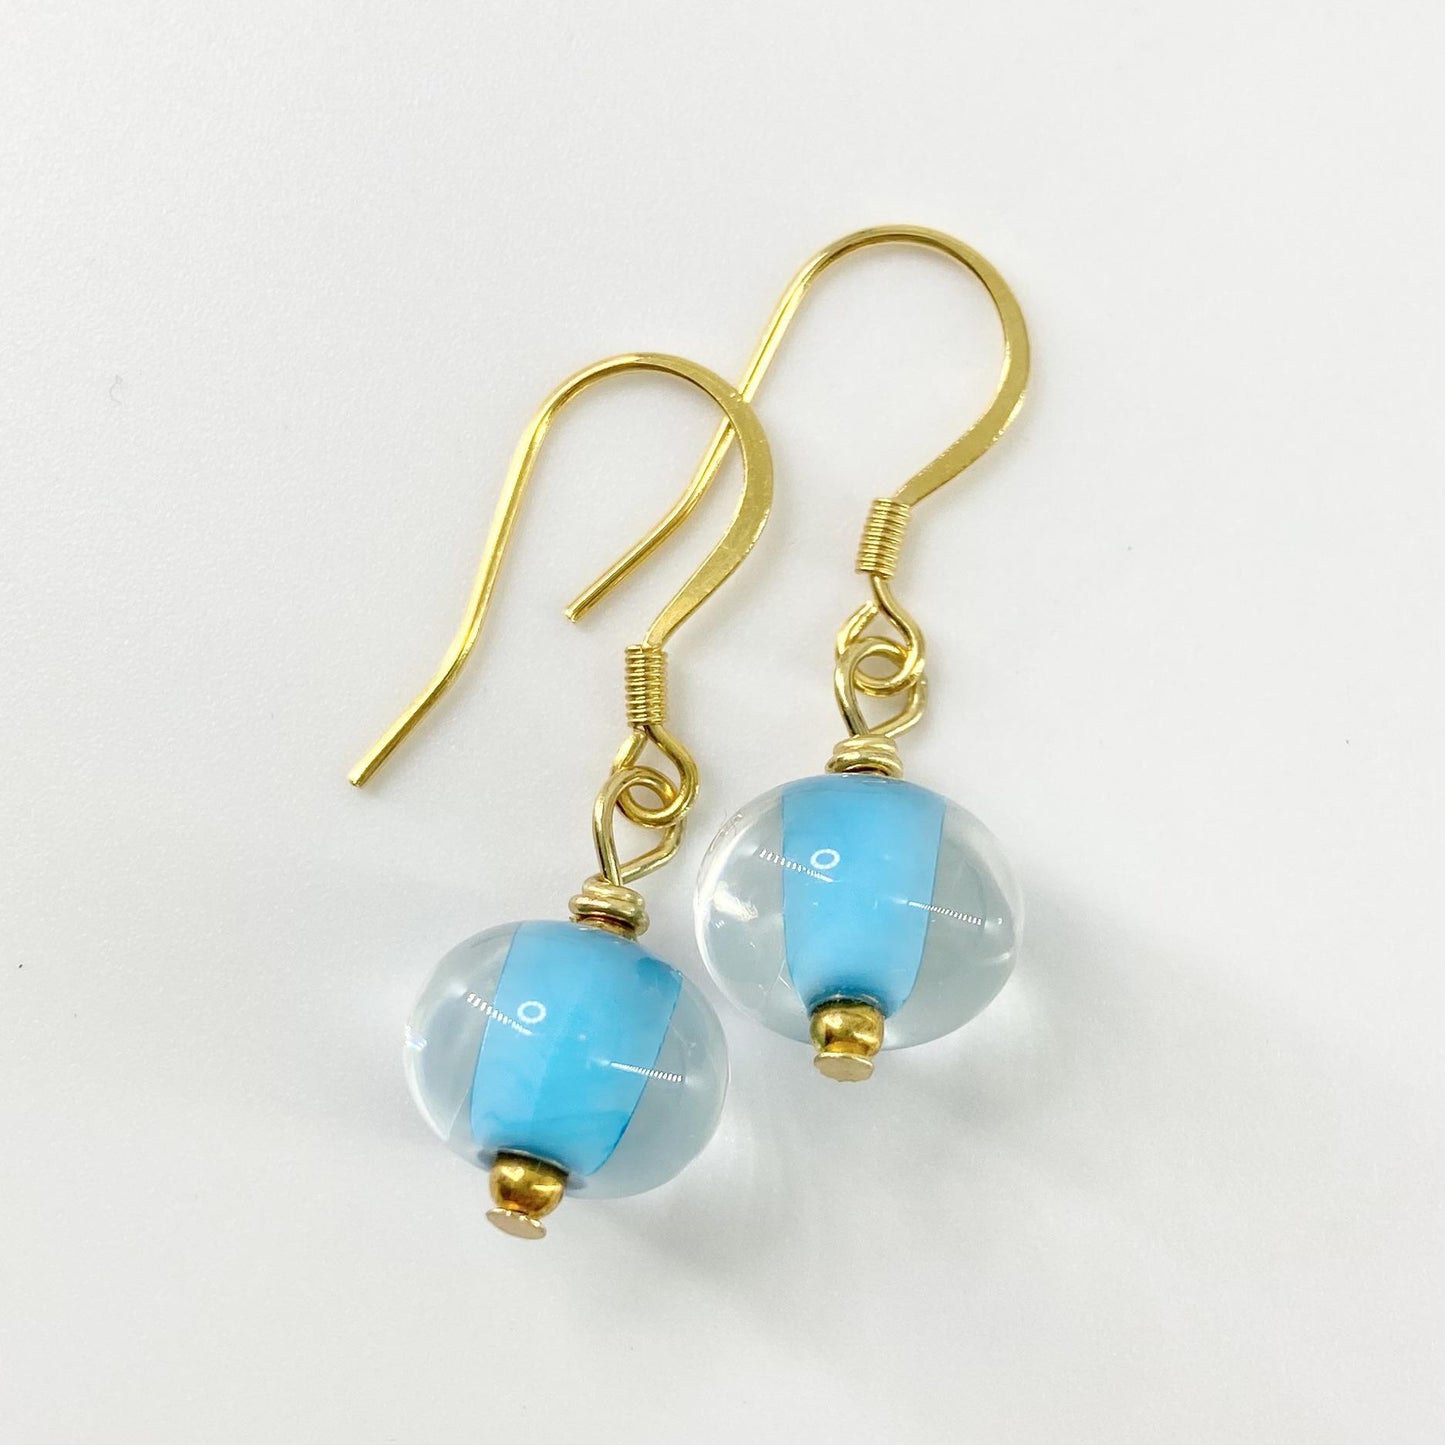 Earrings - Turquoise Core - Glass & Goldfill (Video)